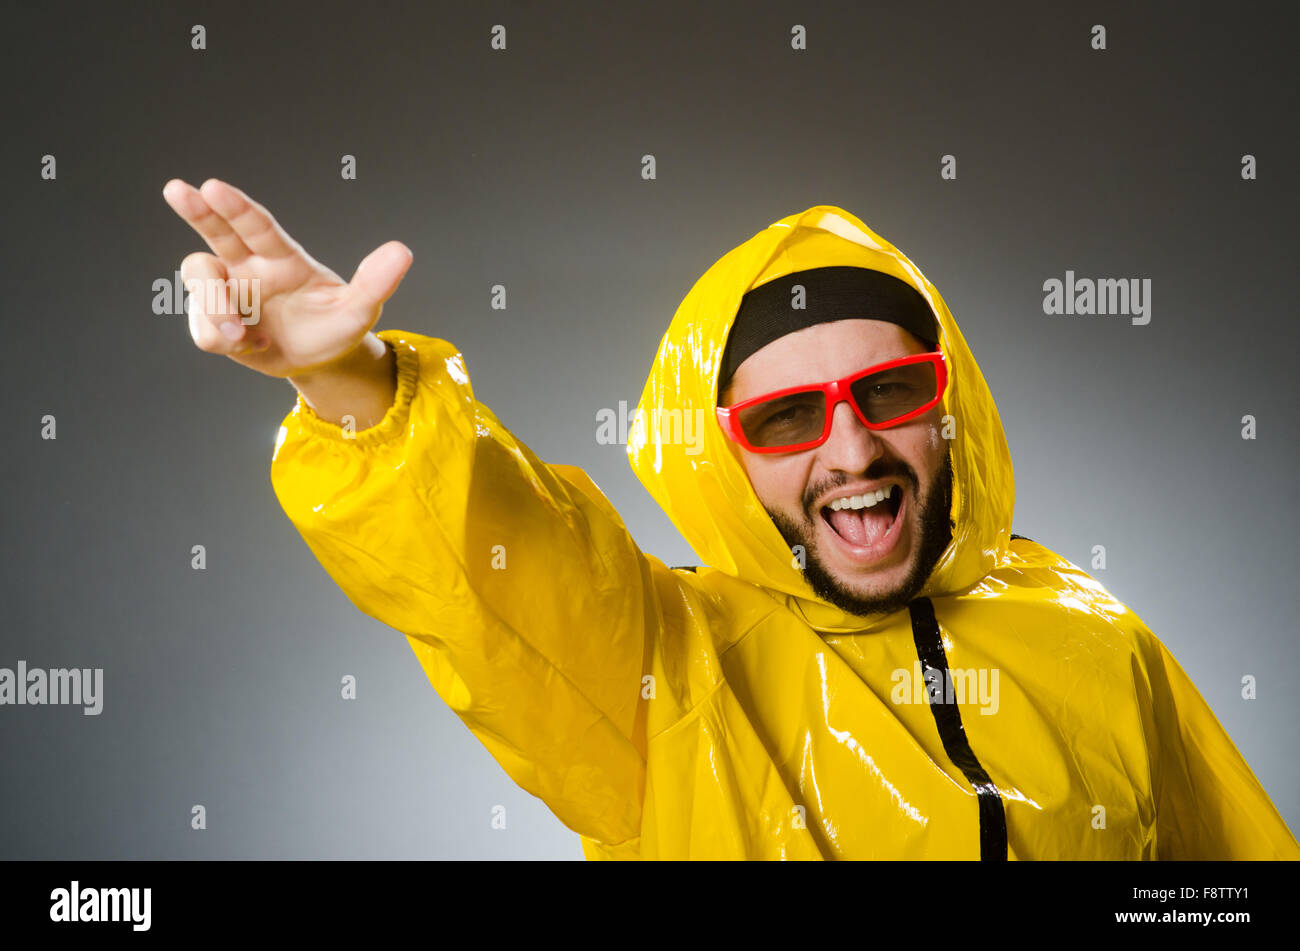 Funny man wearing yellow suit Stock Photo - Alamy